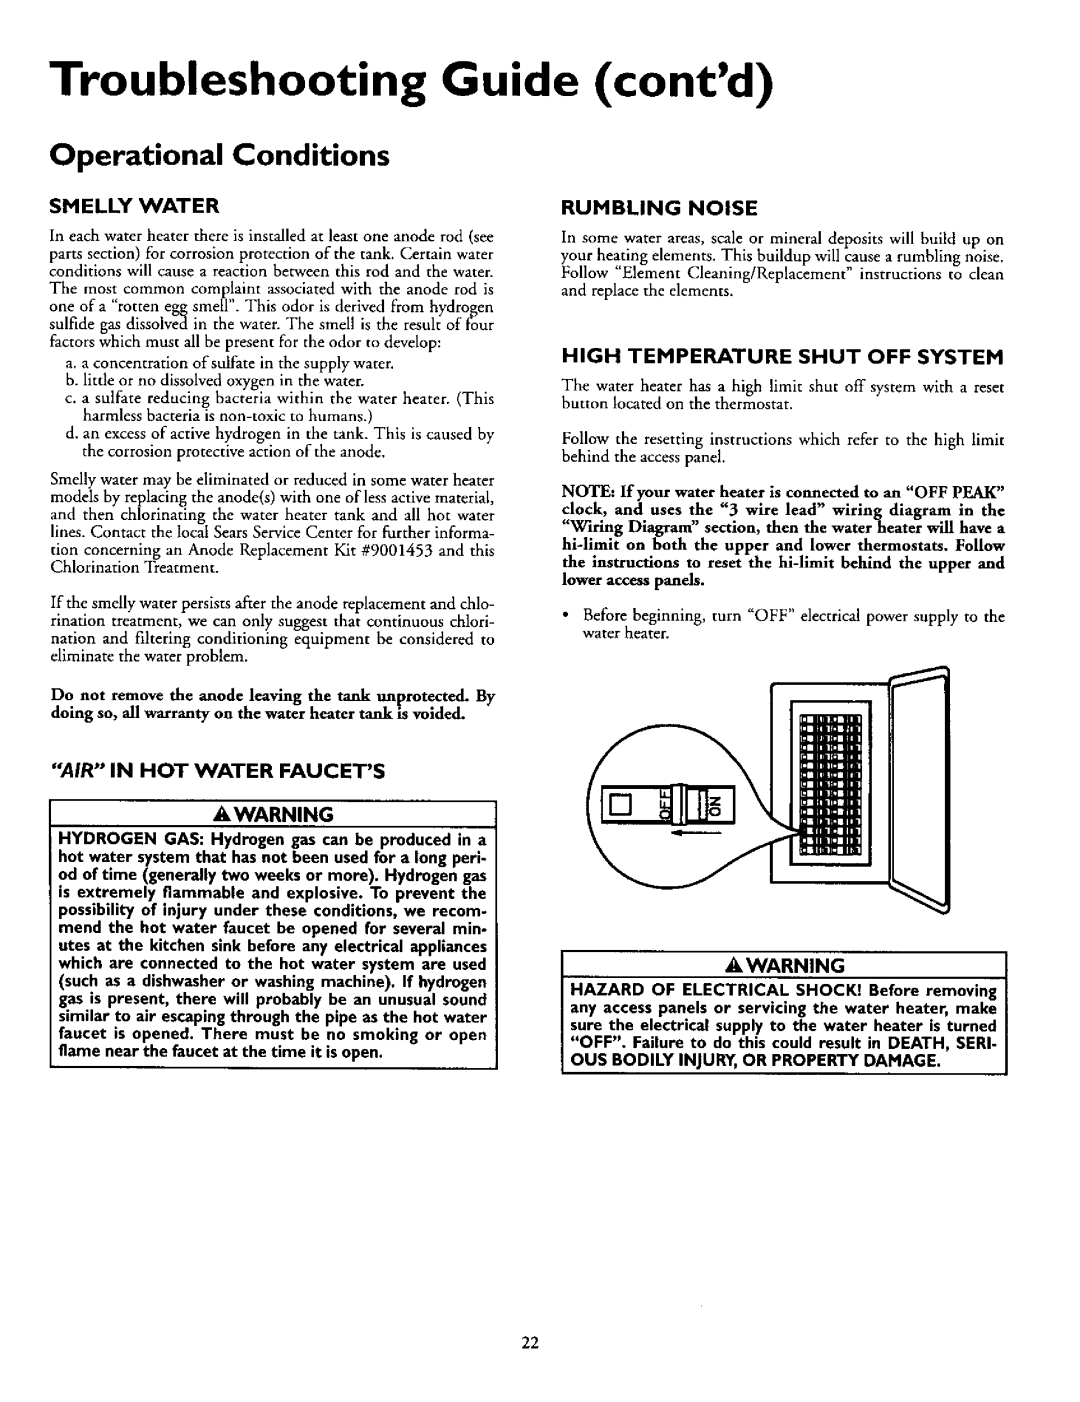 Kenmore 153.320892 HT, 153.320492 HT, 153.320893 HT Troubleshooting Guide contd, Operational Conditions, Awarning 